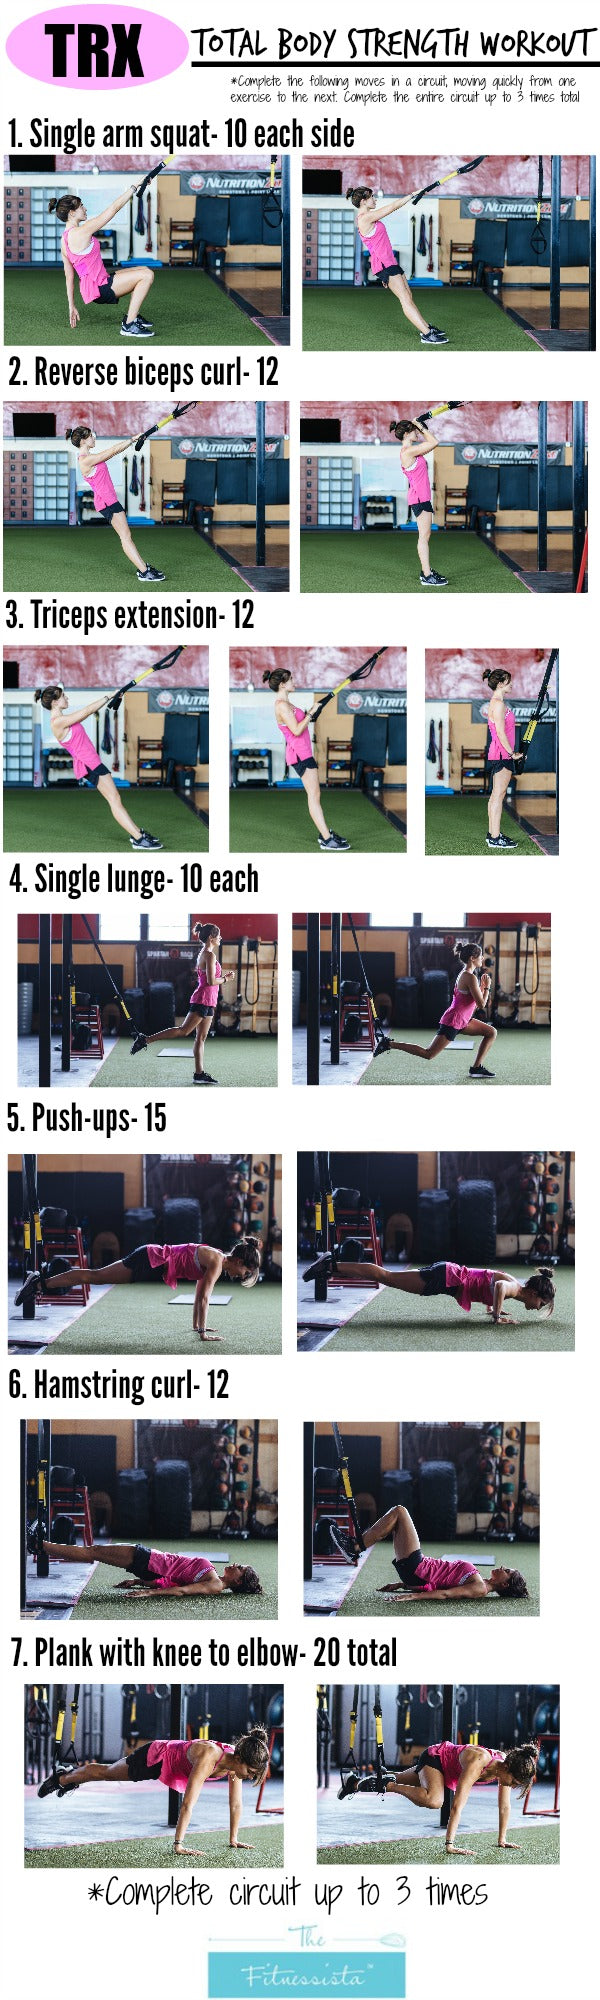 Total-Body TRX Circuit from Fitnessista